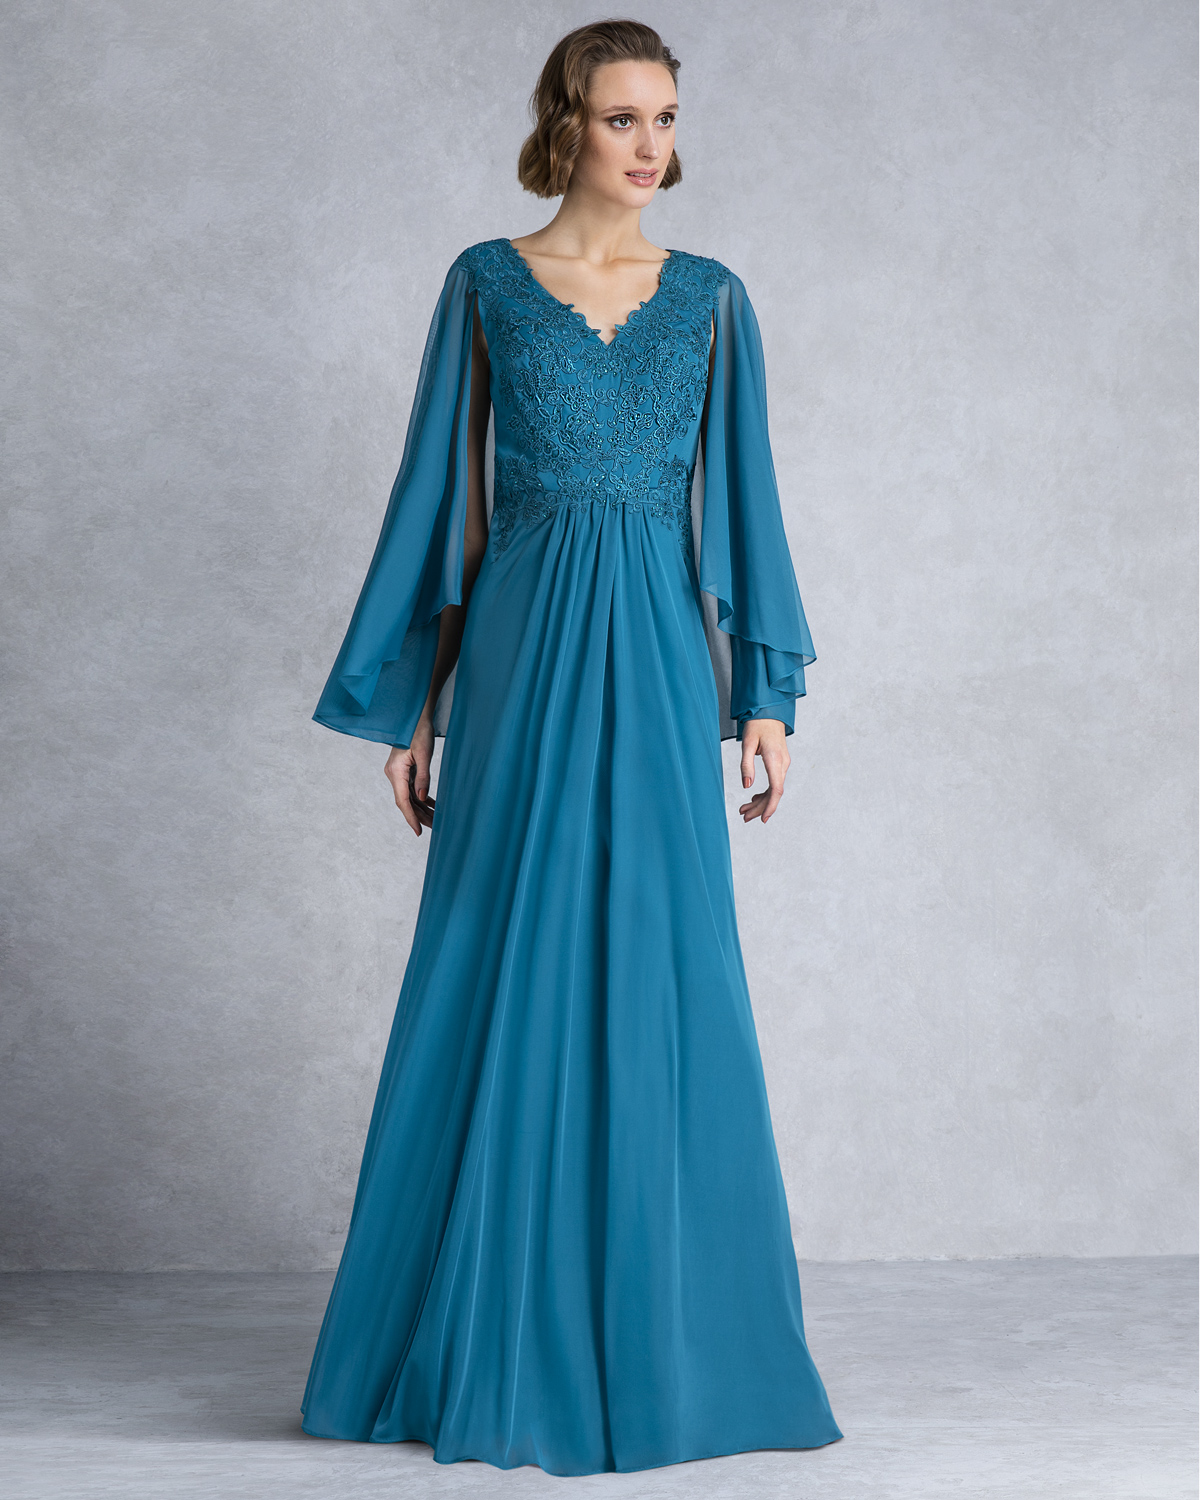 Long evening dress with lace top and chifon sleeves